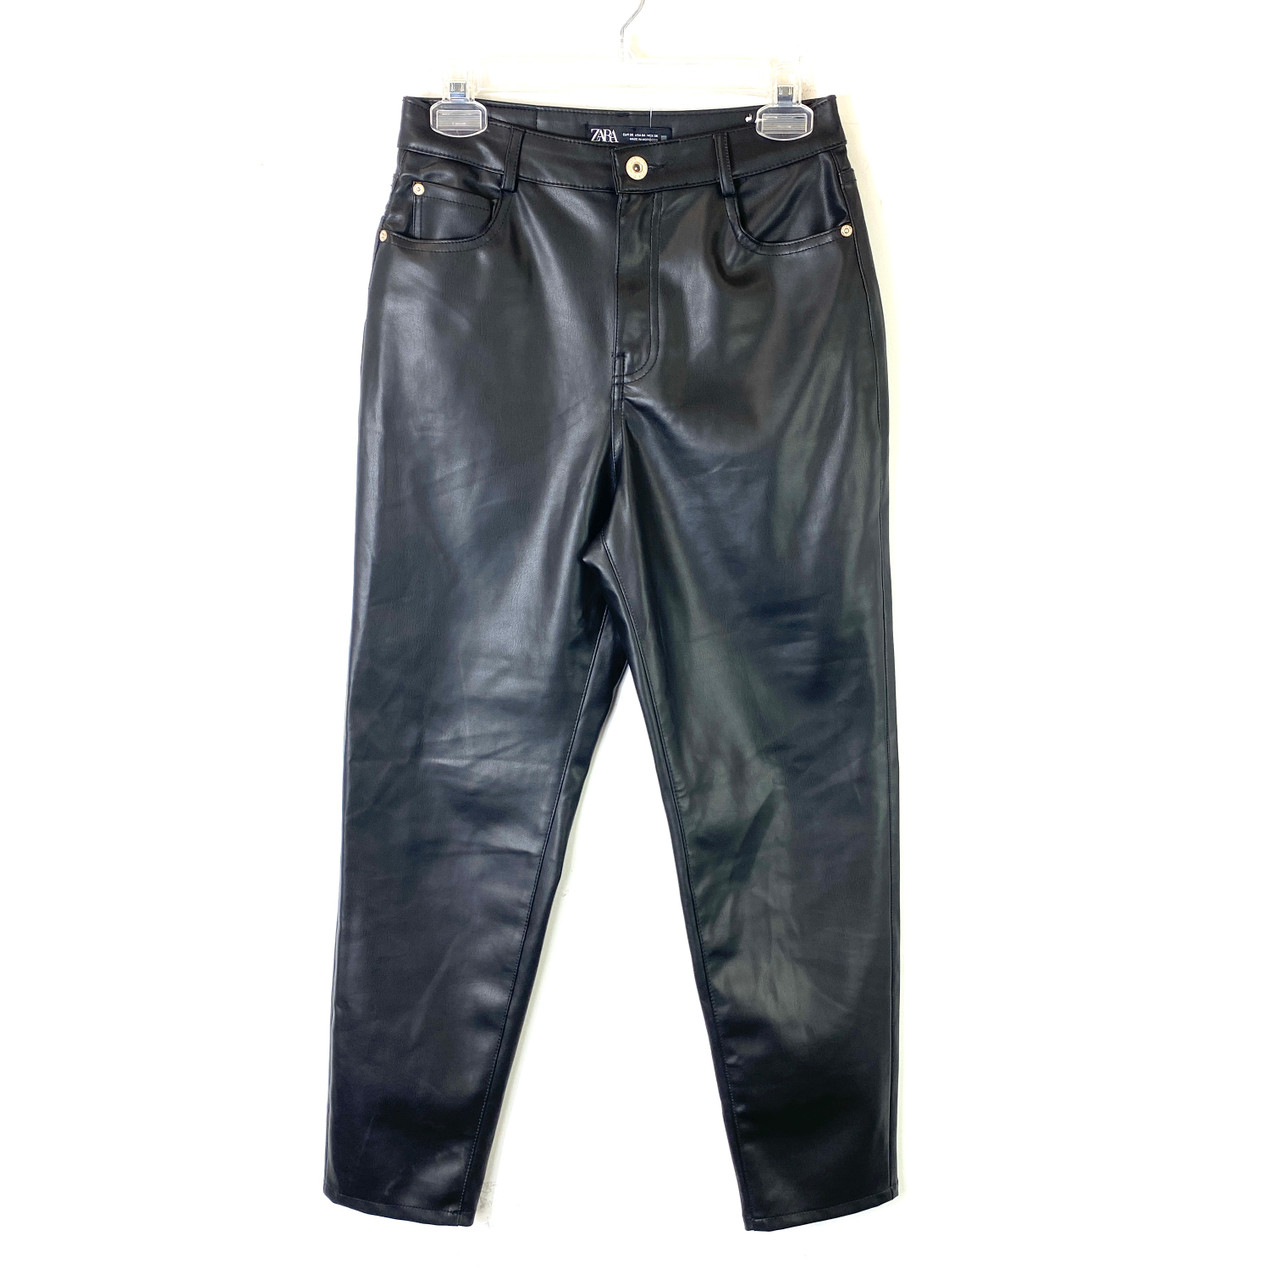 Zara Faux Leather Tapered Pants